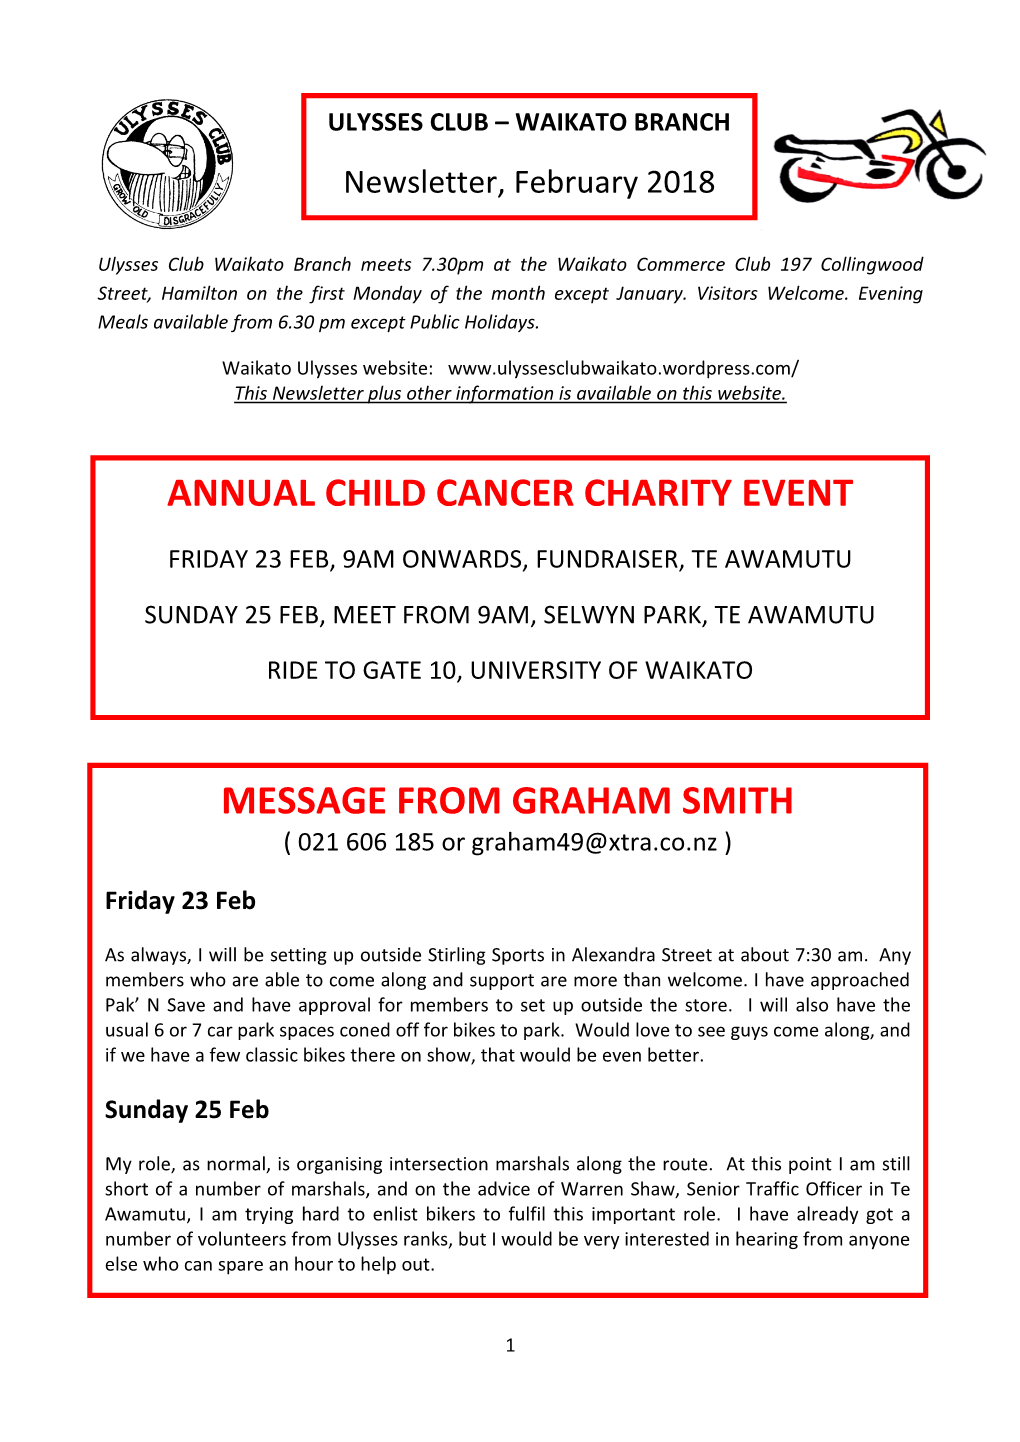 Annual Child Cancer Charity Event Message from Graham Smith